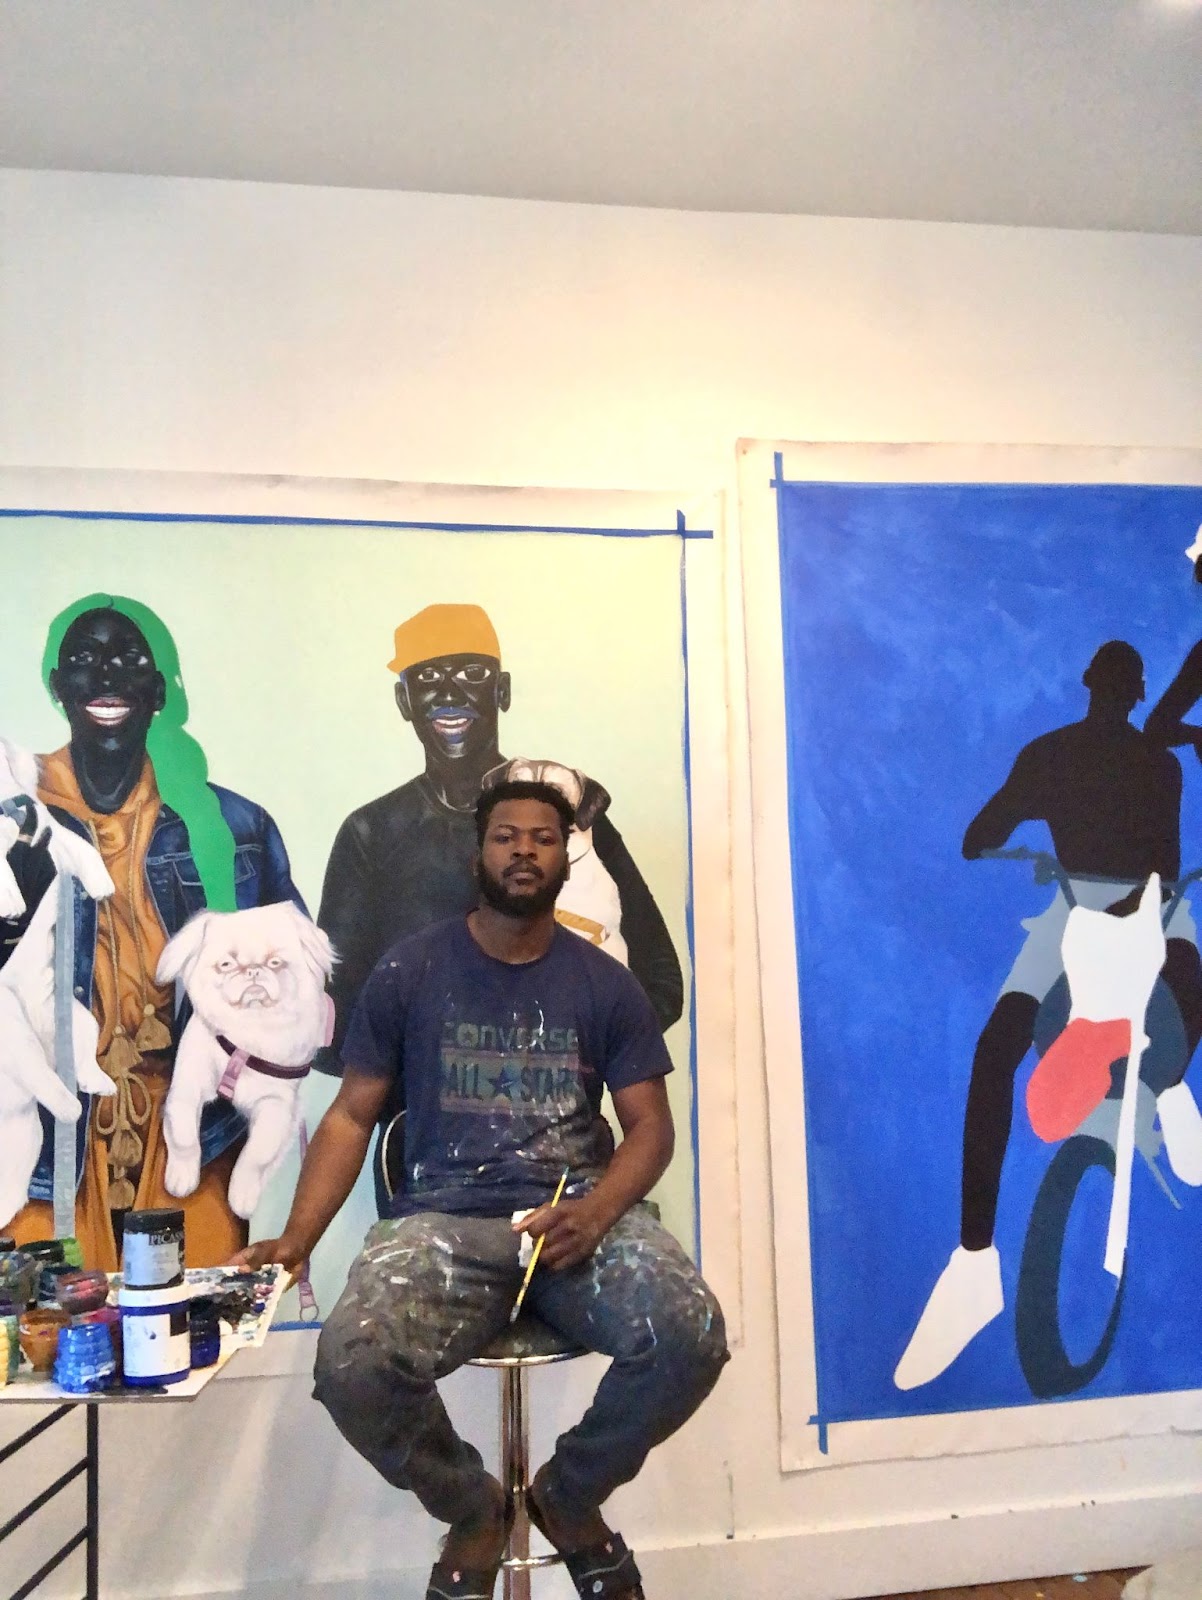 Sesse Elangwe in front of two works in progress